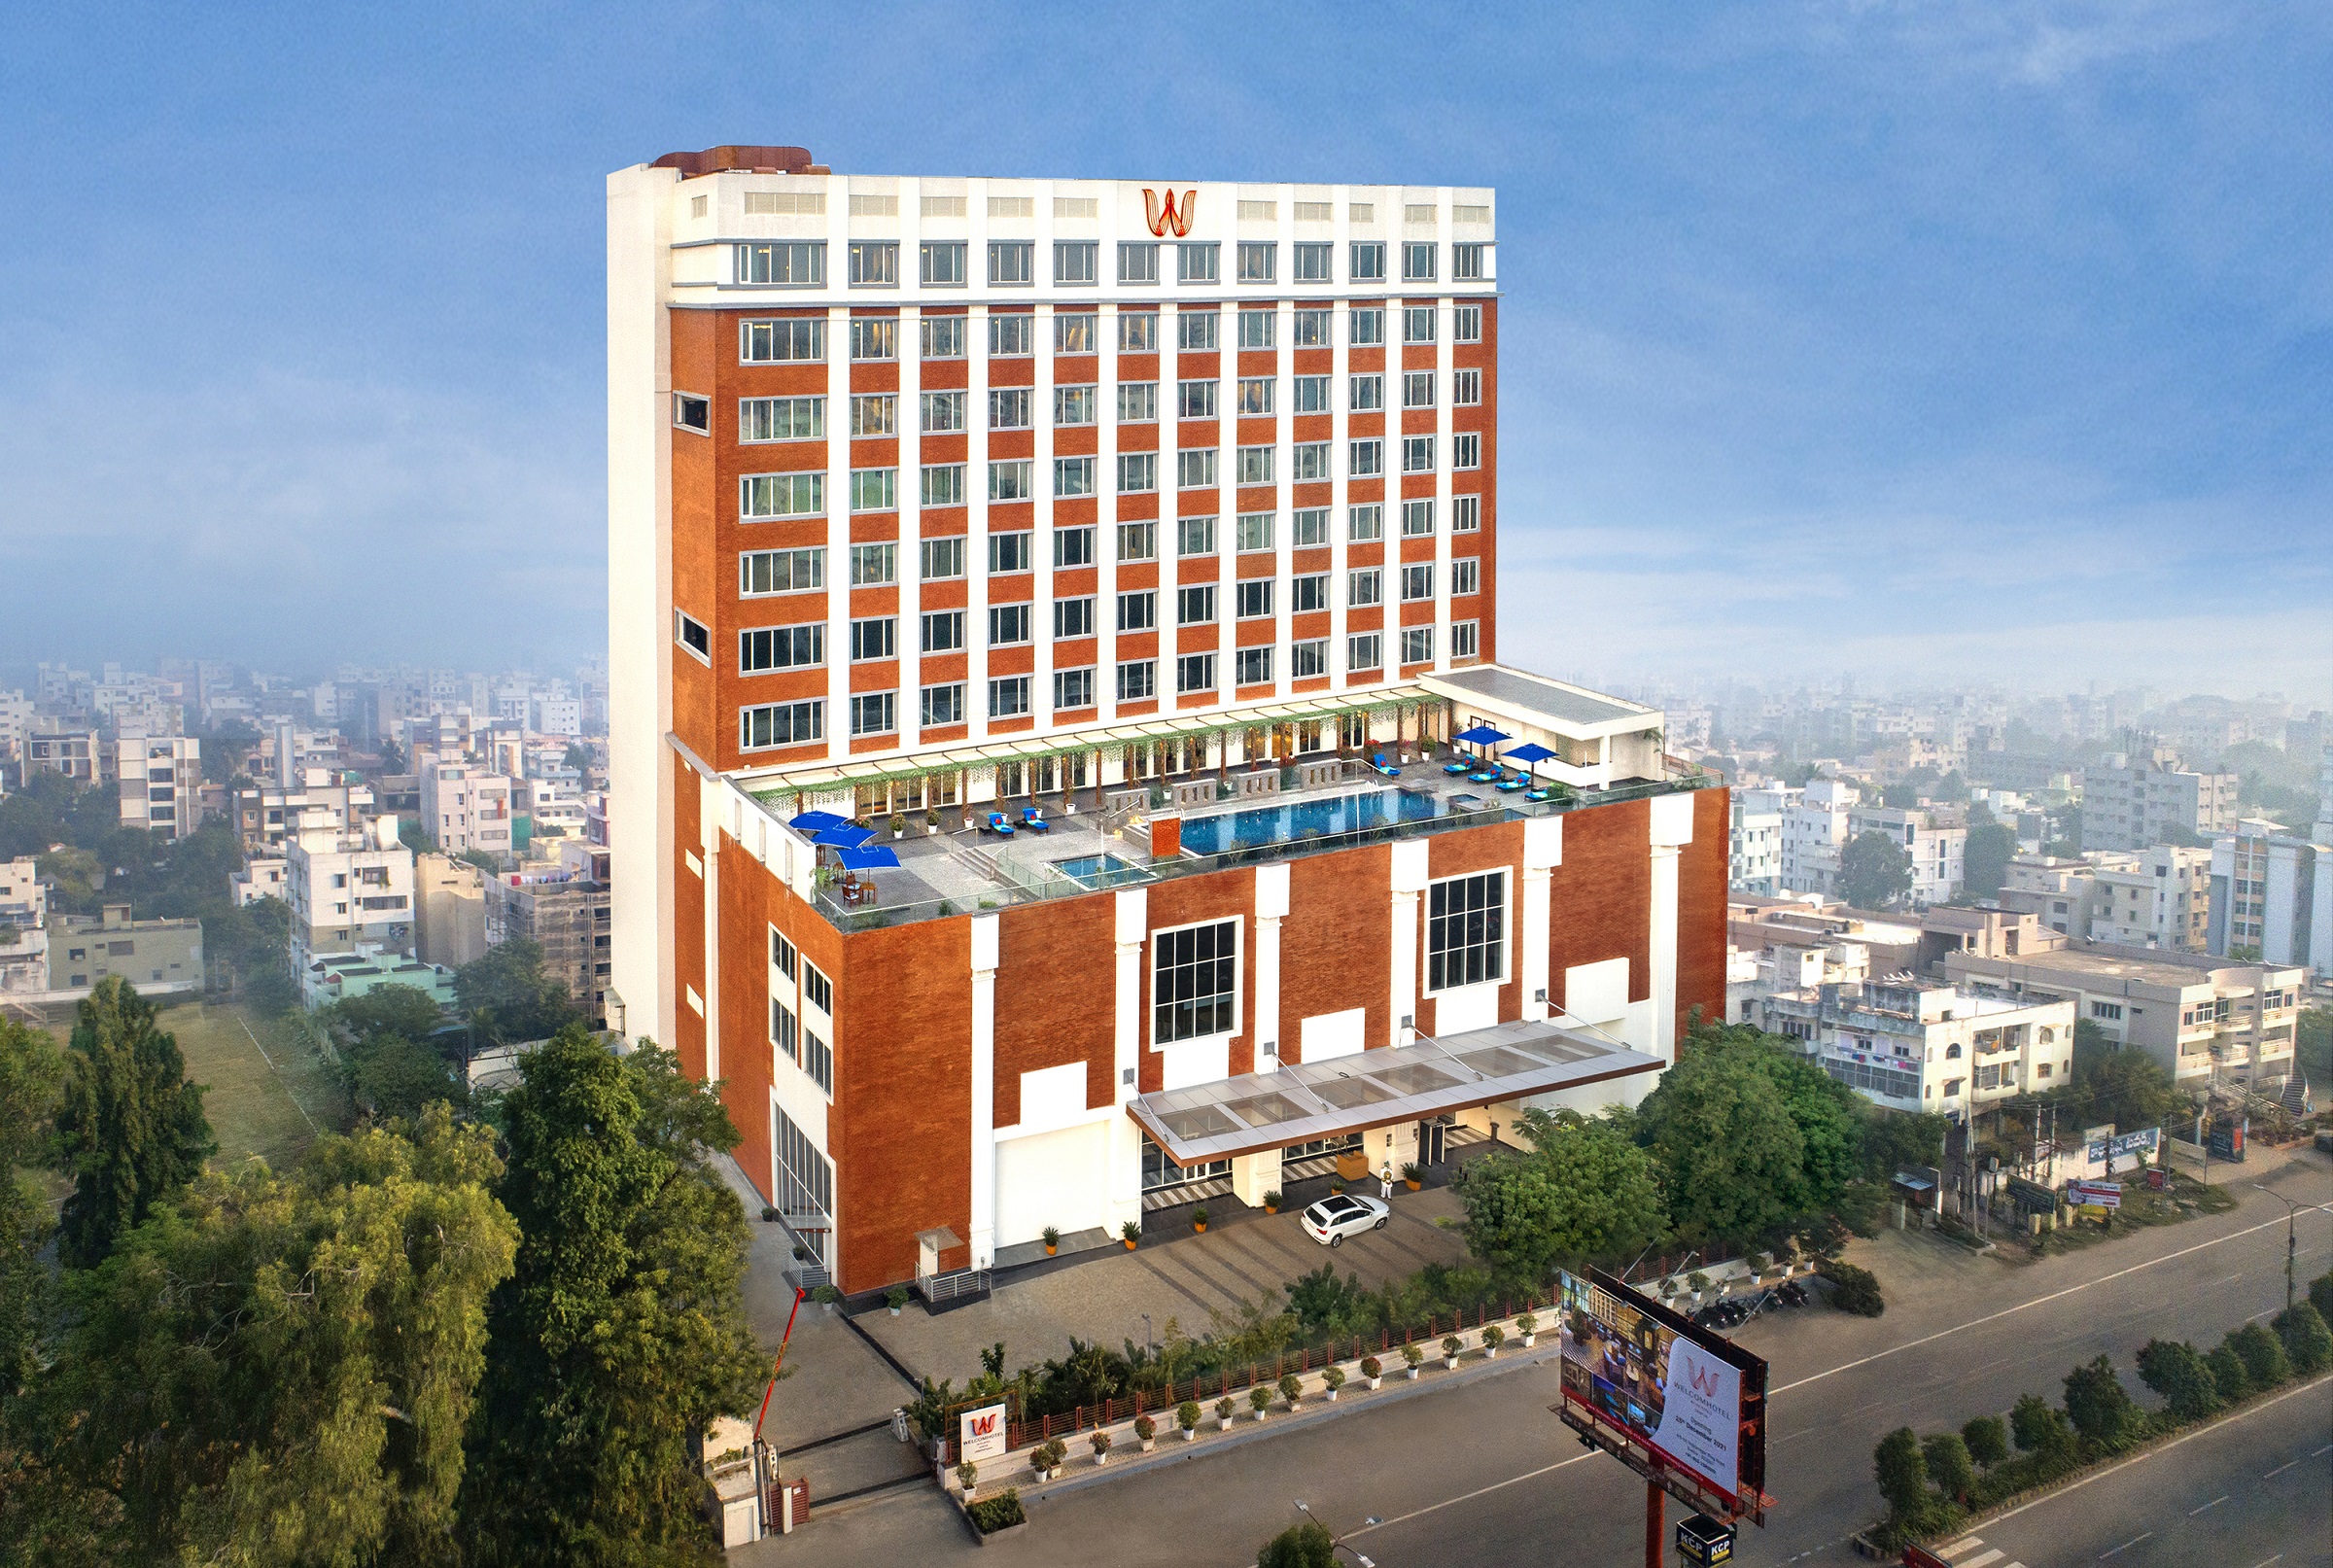 ITC Hotels Brand Welcomhotel Strengthens Footprint in South 